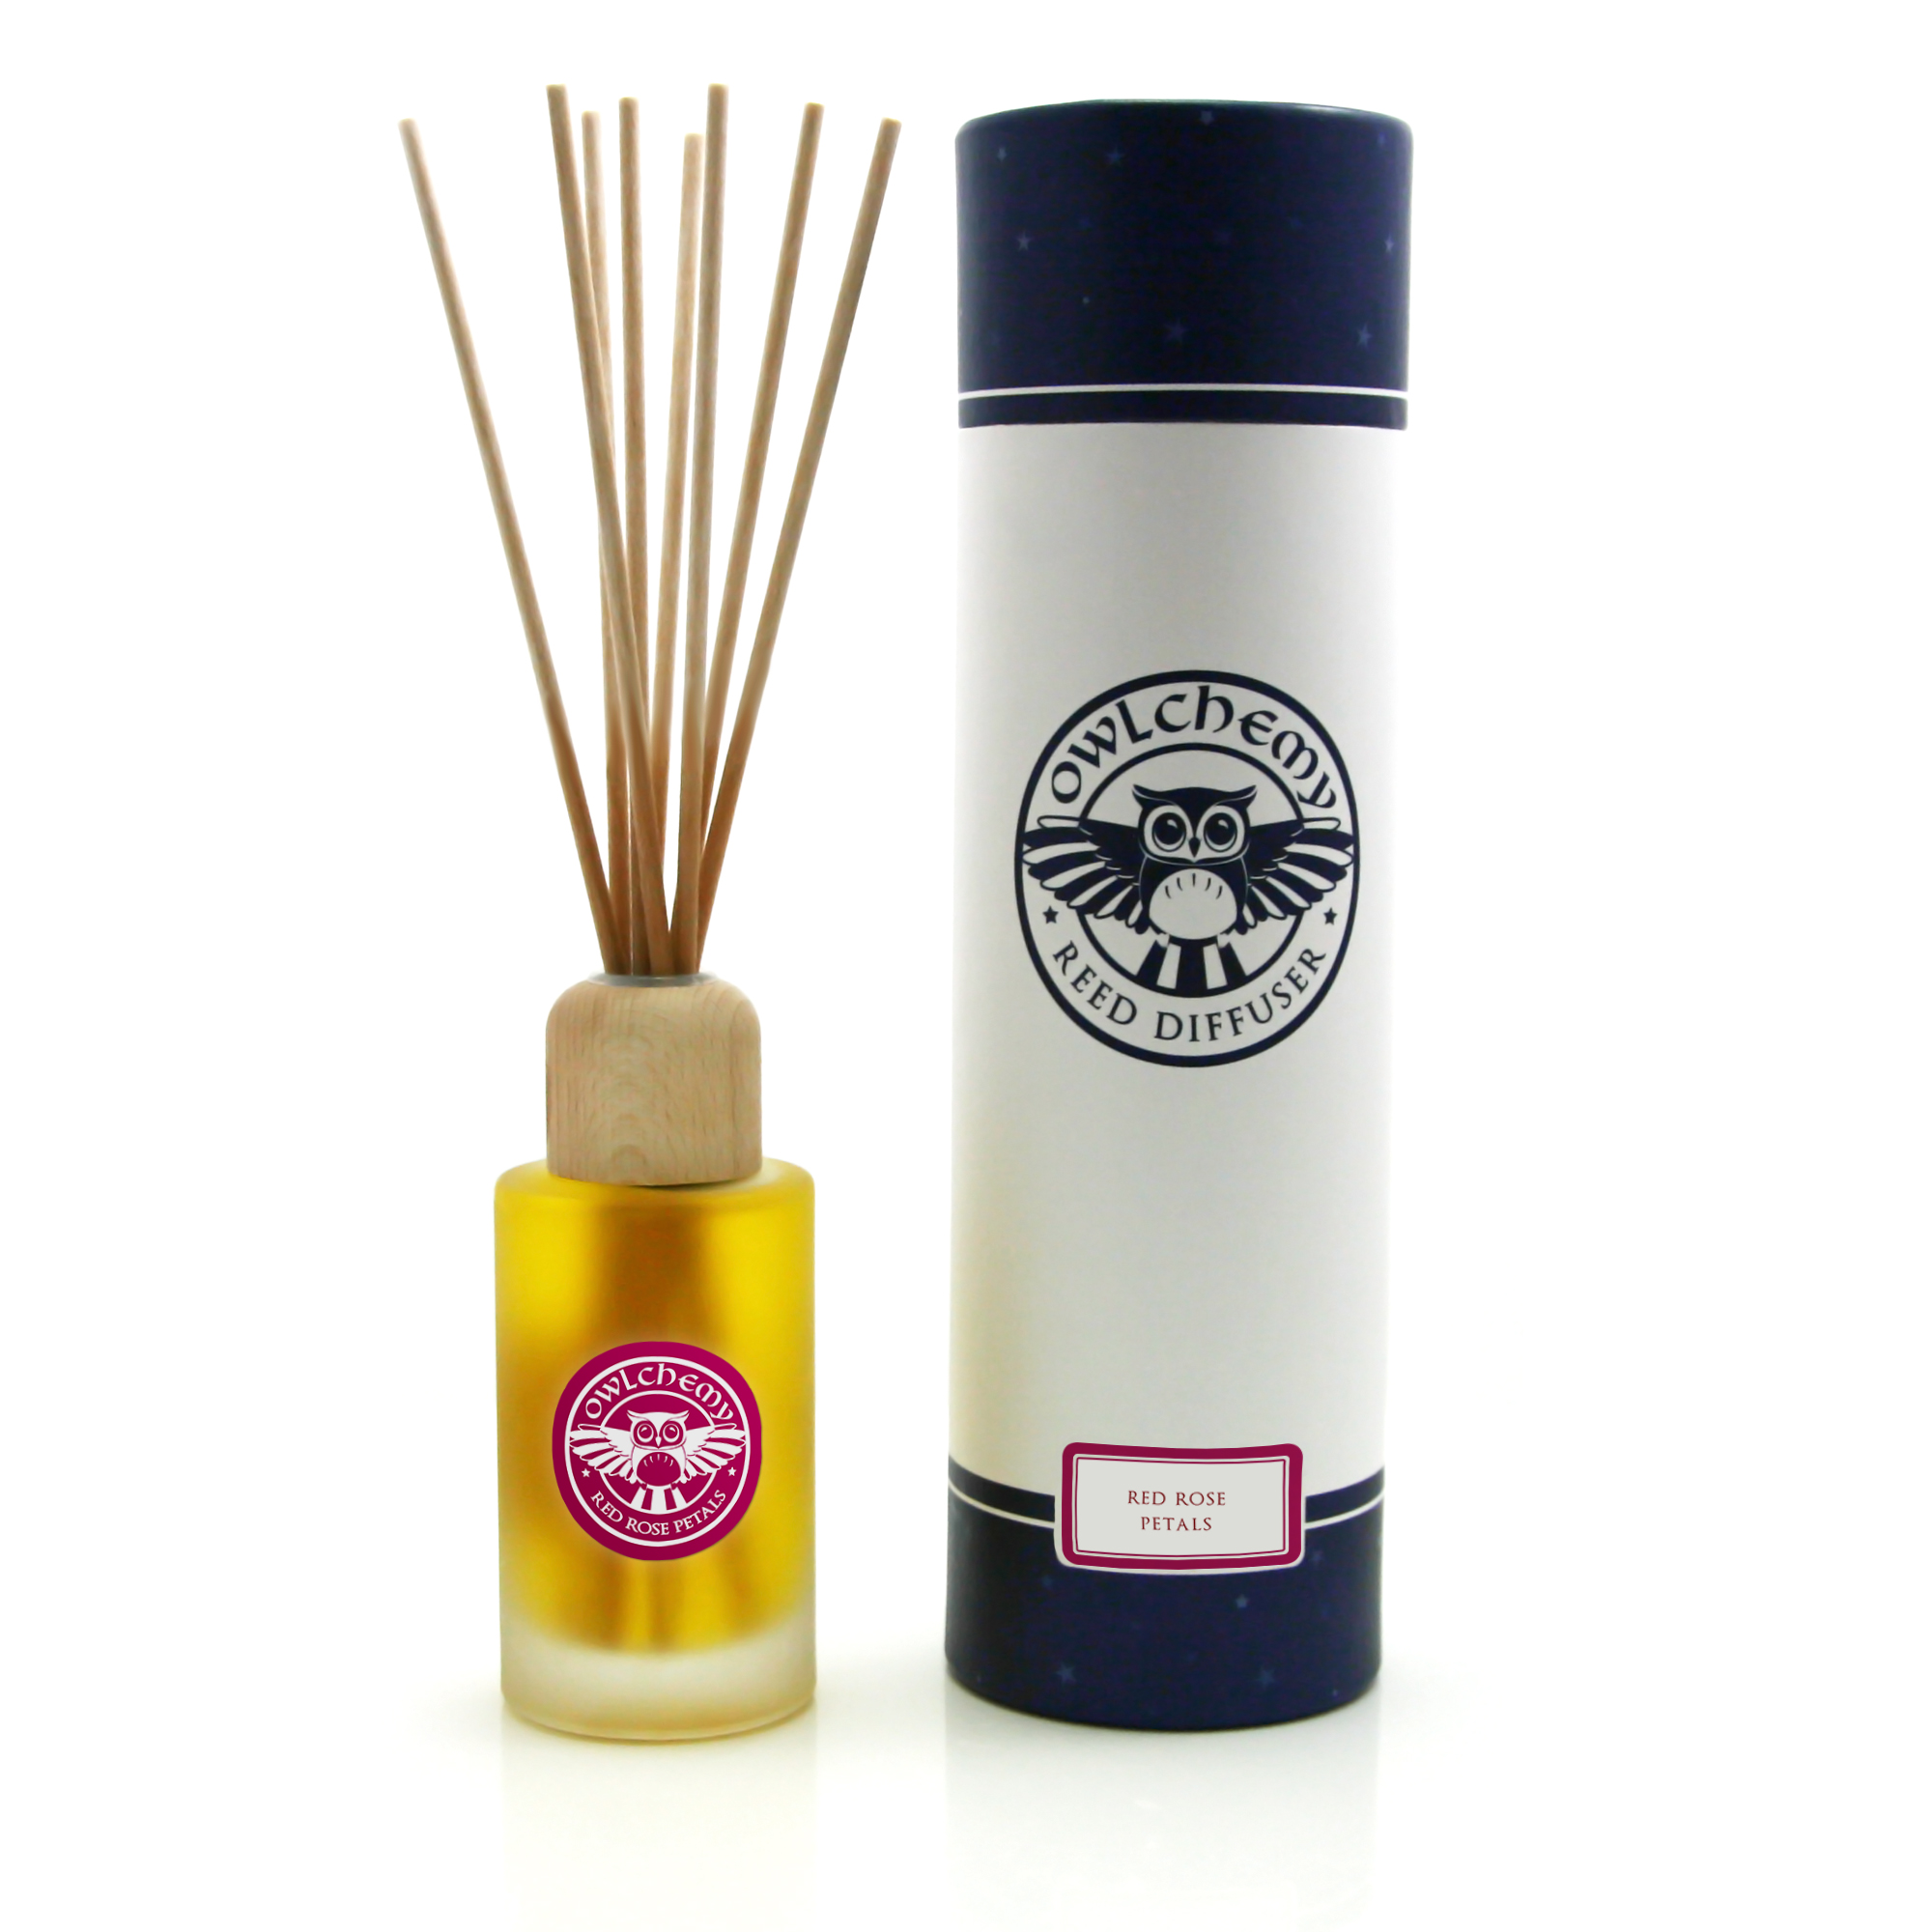 A bottle of our Celebration Reed Diffuser with Red Rose Petals next to its box.